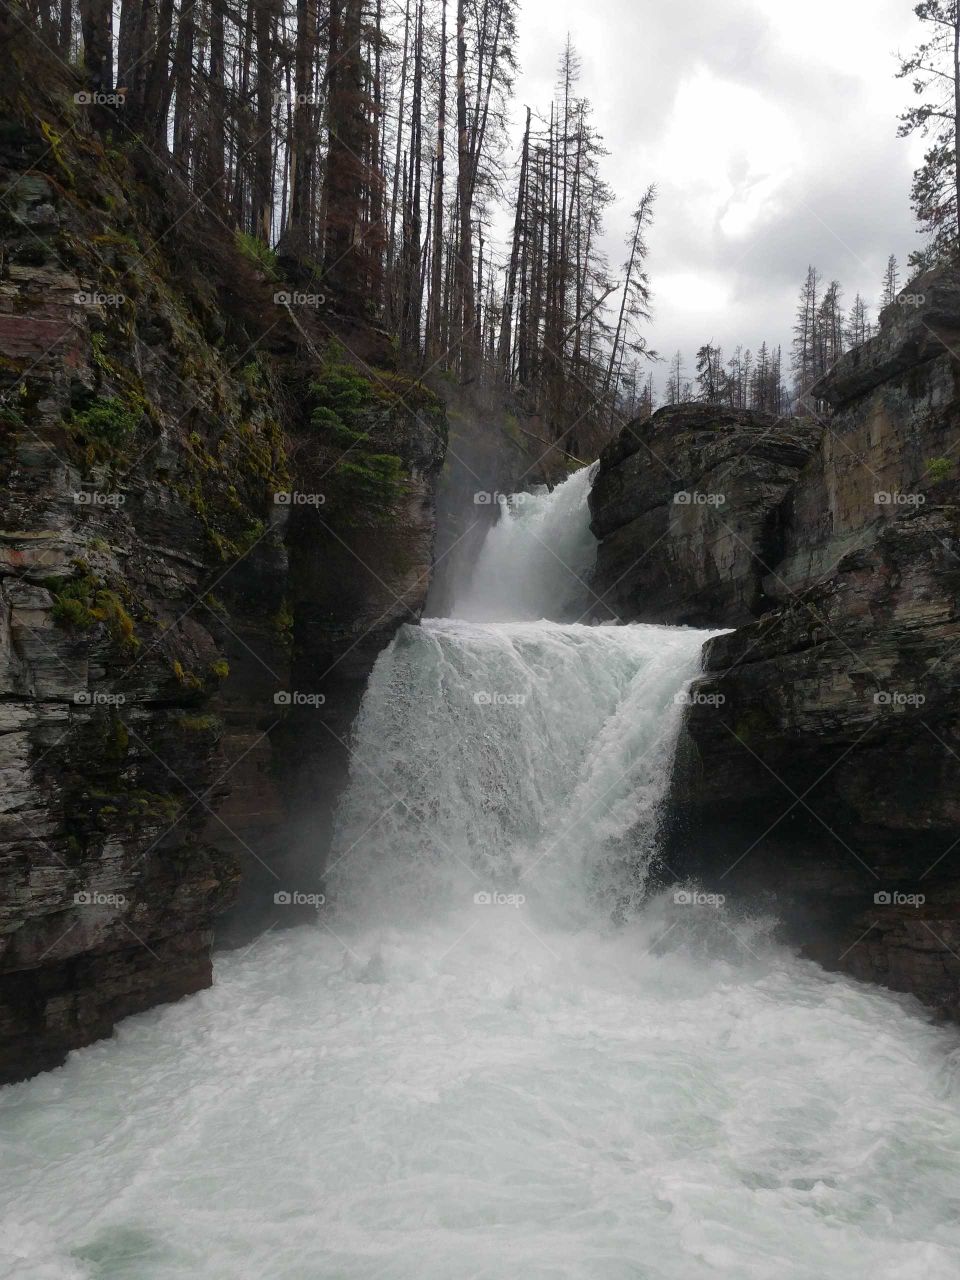 Rushing Waterfall in Glacier National Park in Montana